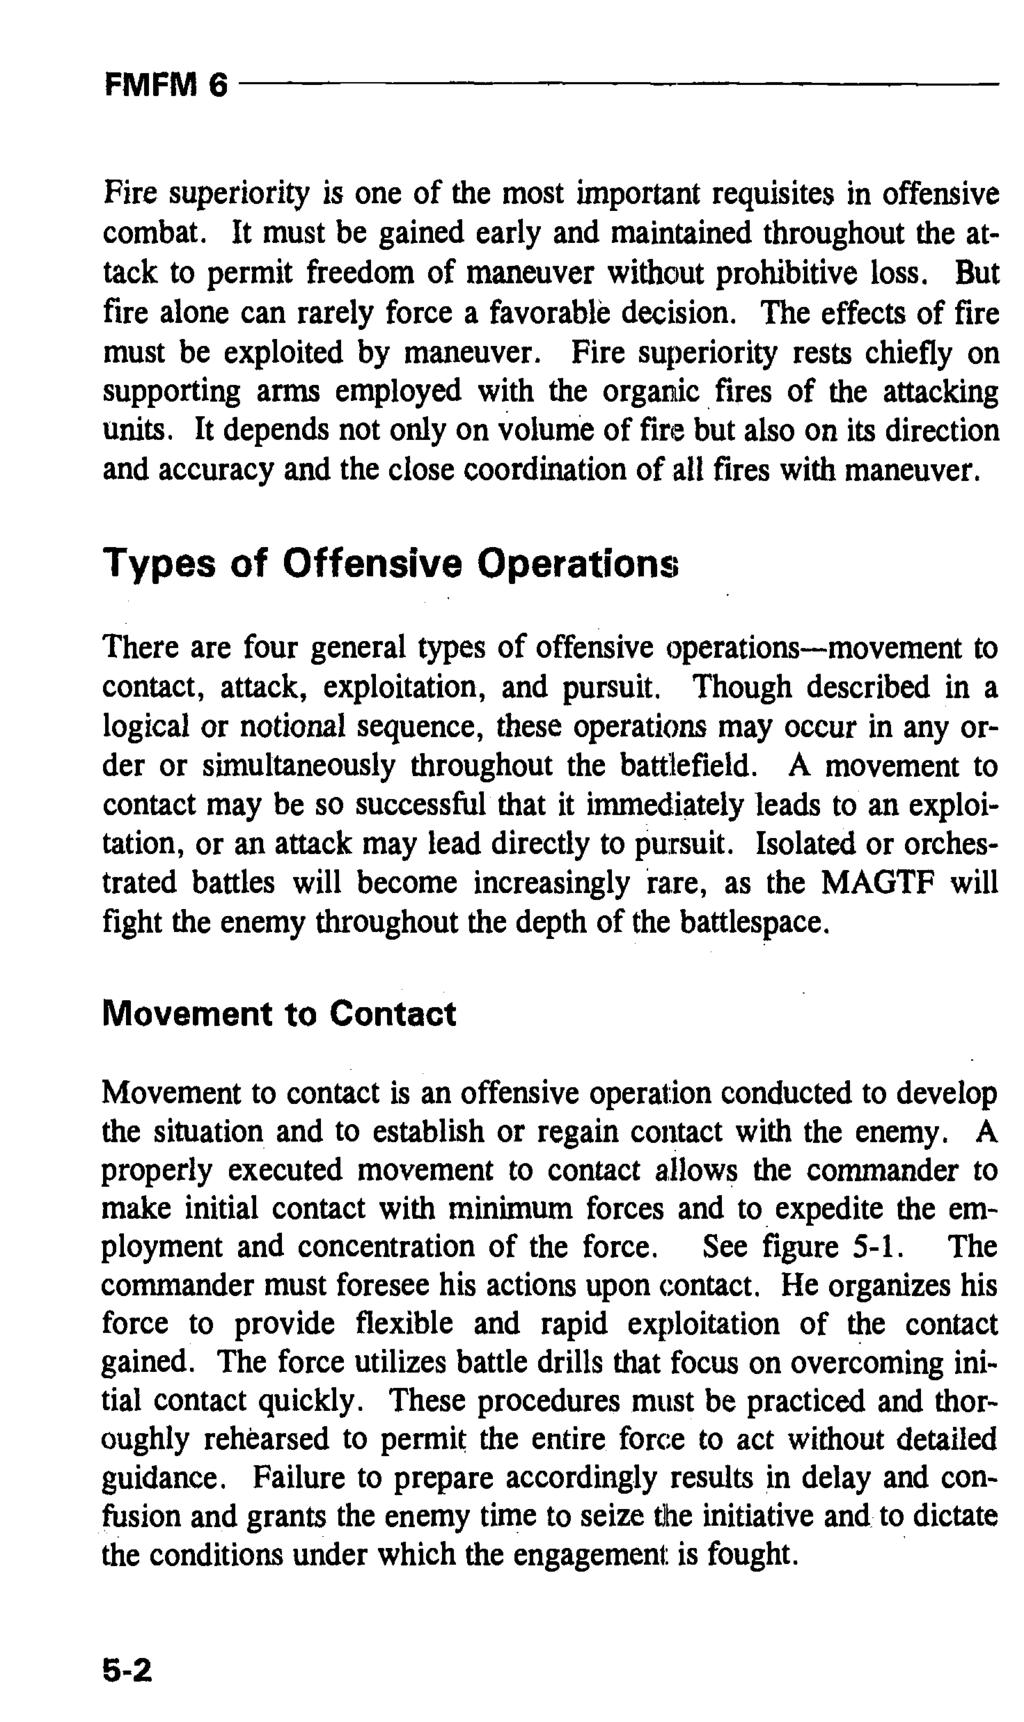 Fire superiority is one of the most important requisites in offensive combat. It must be gained early and maintained throughout the attack to permit freedom of maneuver without prohibitive loss.